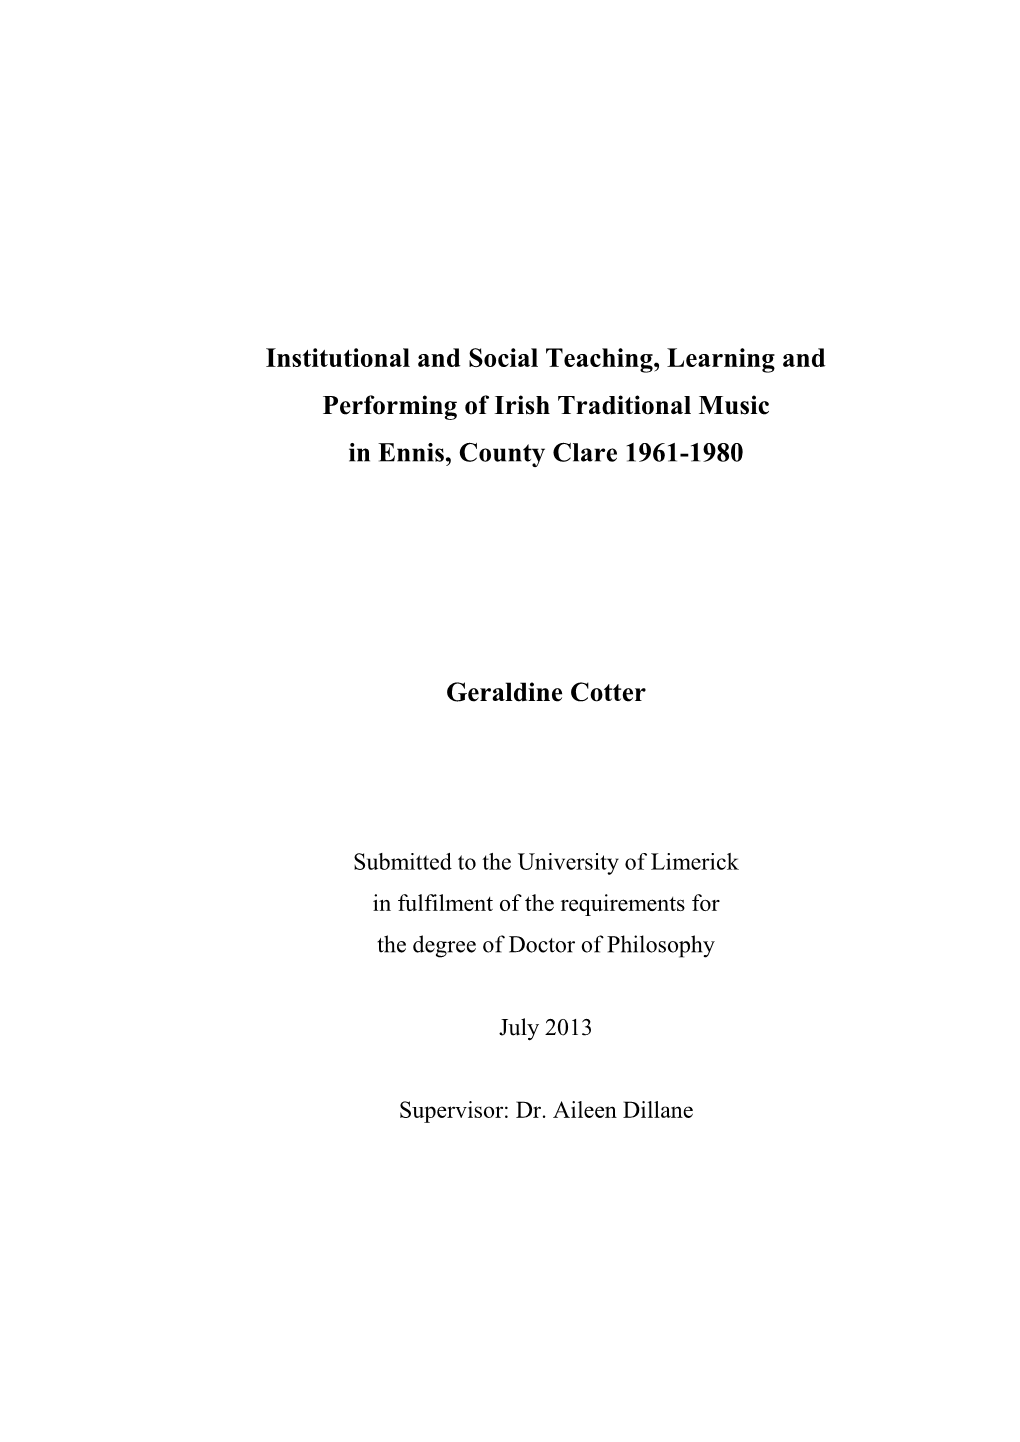 Institutional and Social Teaching, Learning and Performing of Irish Traditional Music in Ennis, County Clare 1961-1980